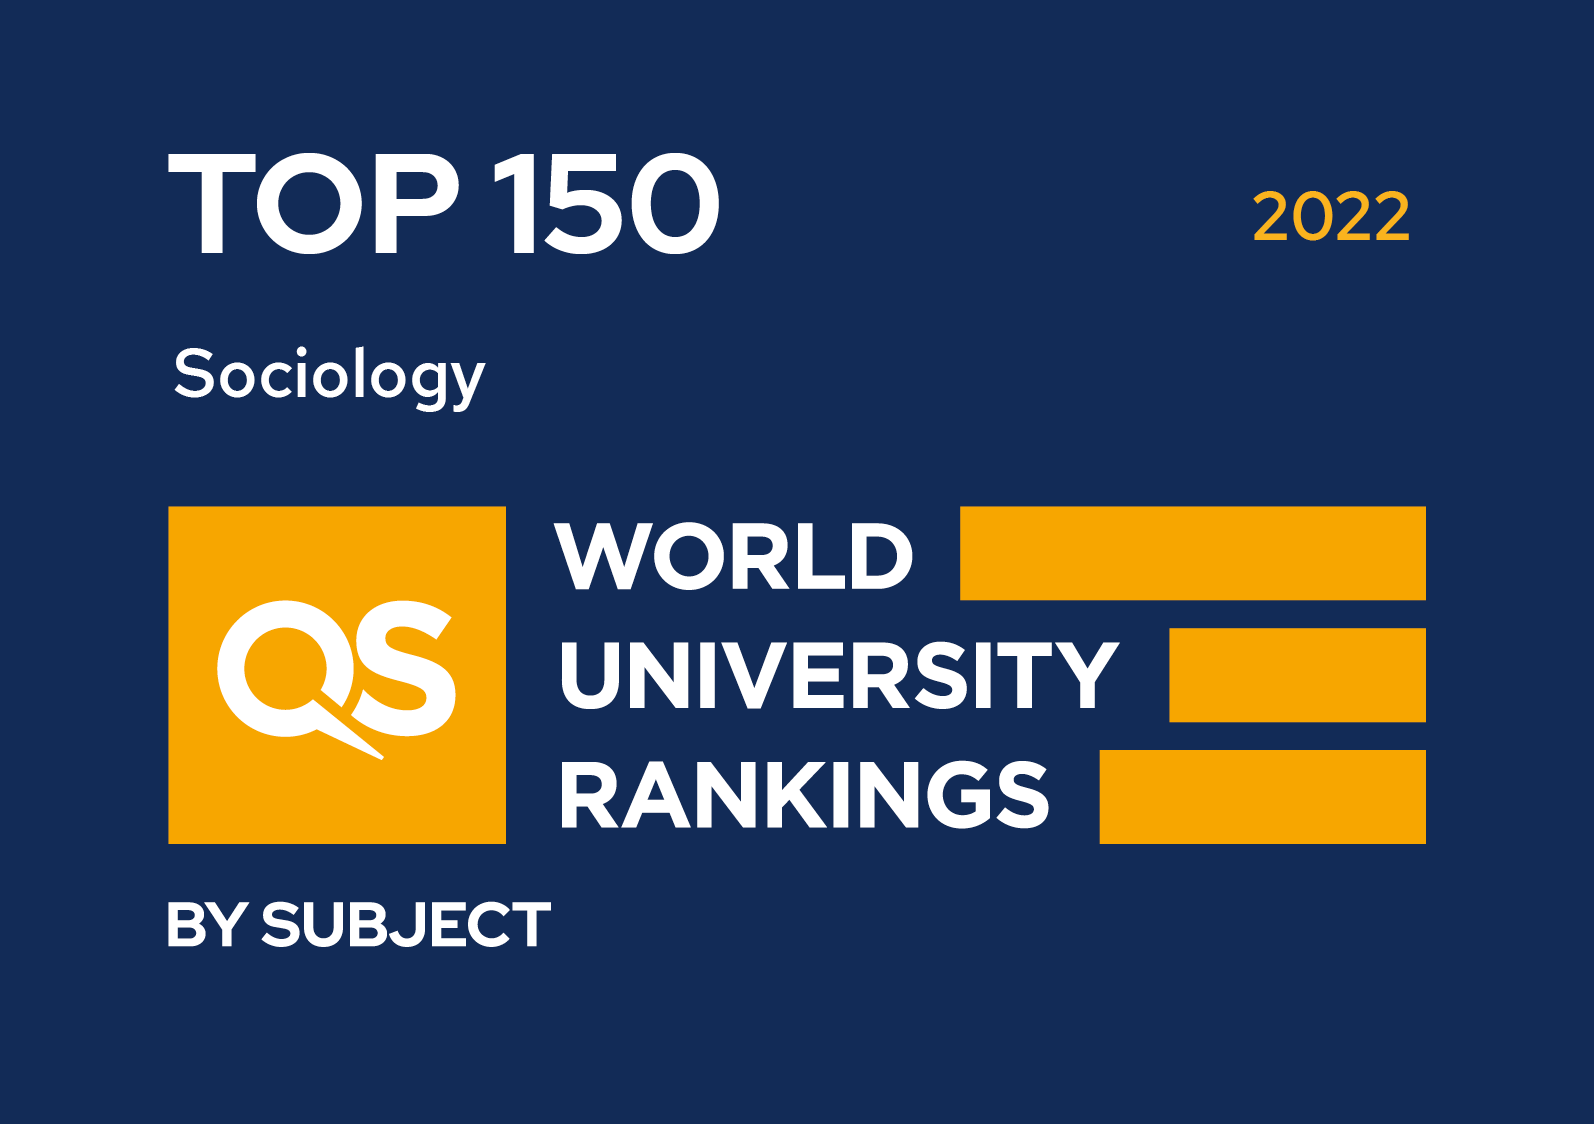 We are a Top 150 University in the world for Sociology